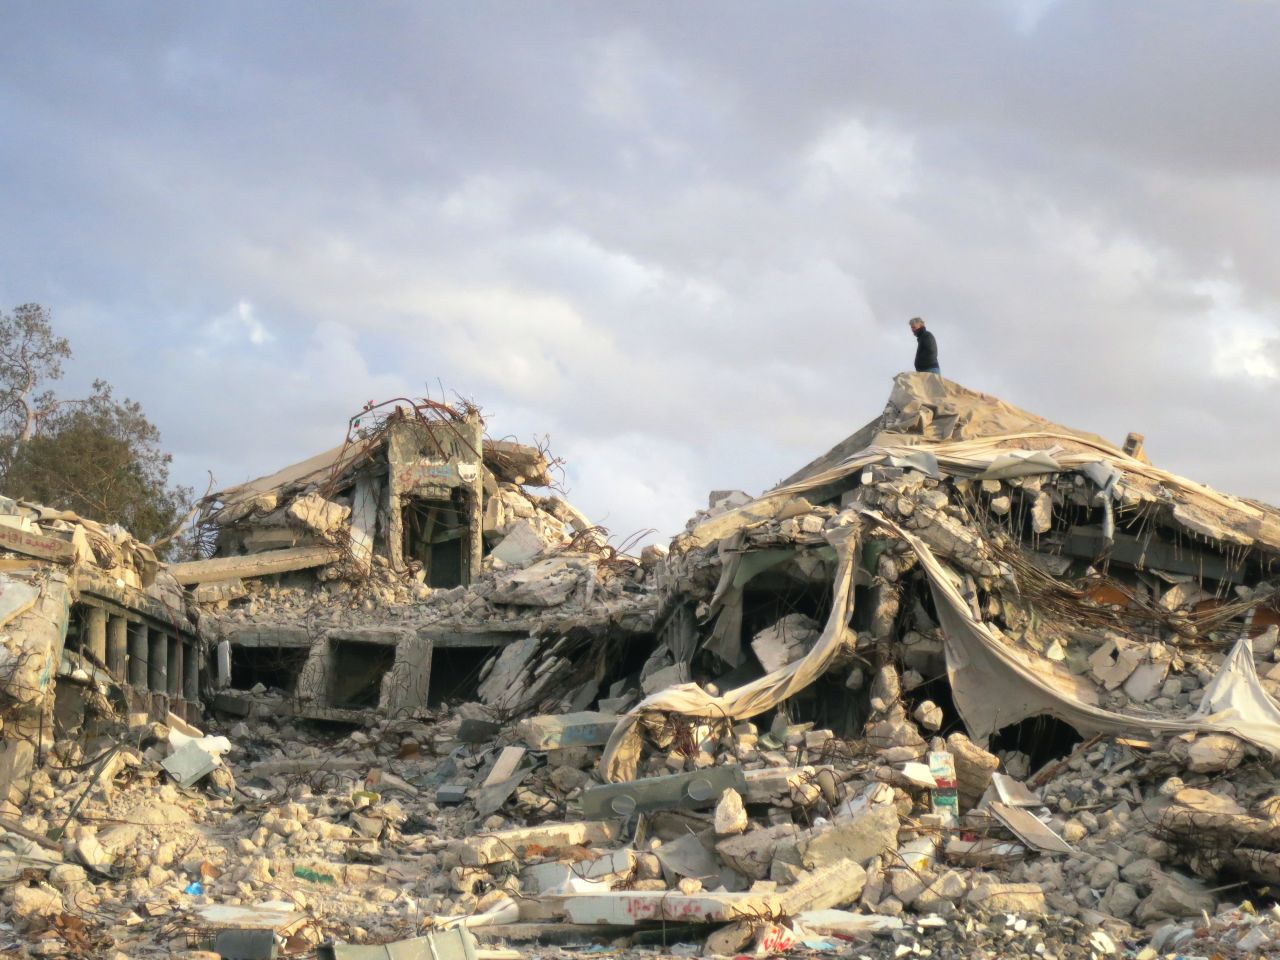 Bourdain stands atop the rubble that was once Moammar Gadhafi's compound in Tripoli.